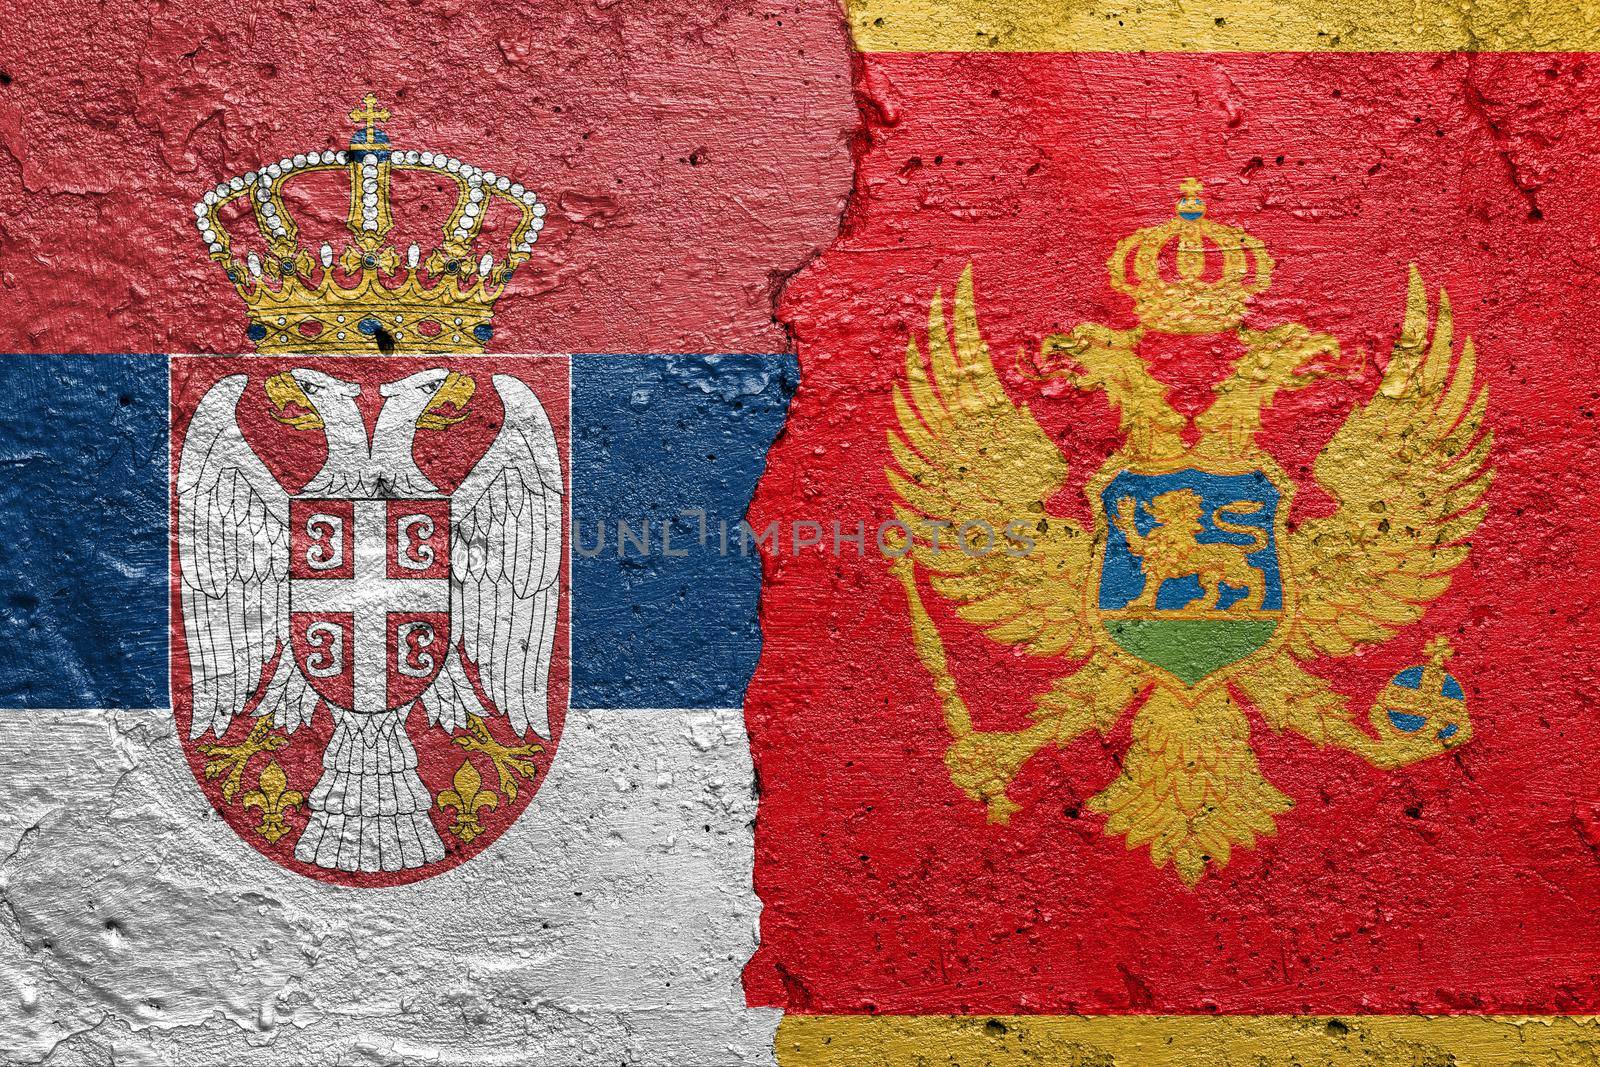 Serbia and Montenegro flags  - Cracked concrete wall painted with a Serbian flag on the left and a Montenegrin flag on the right